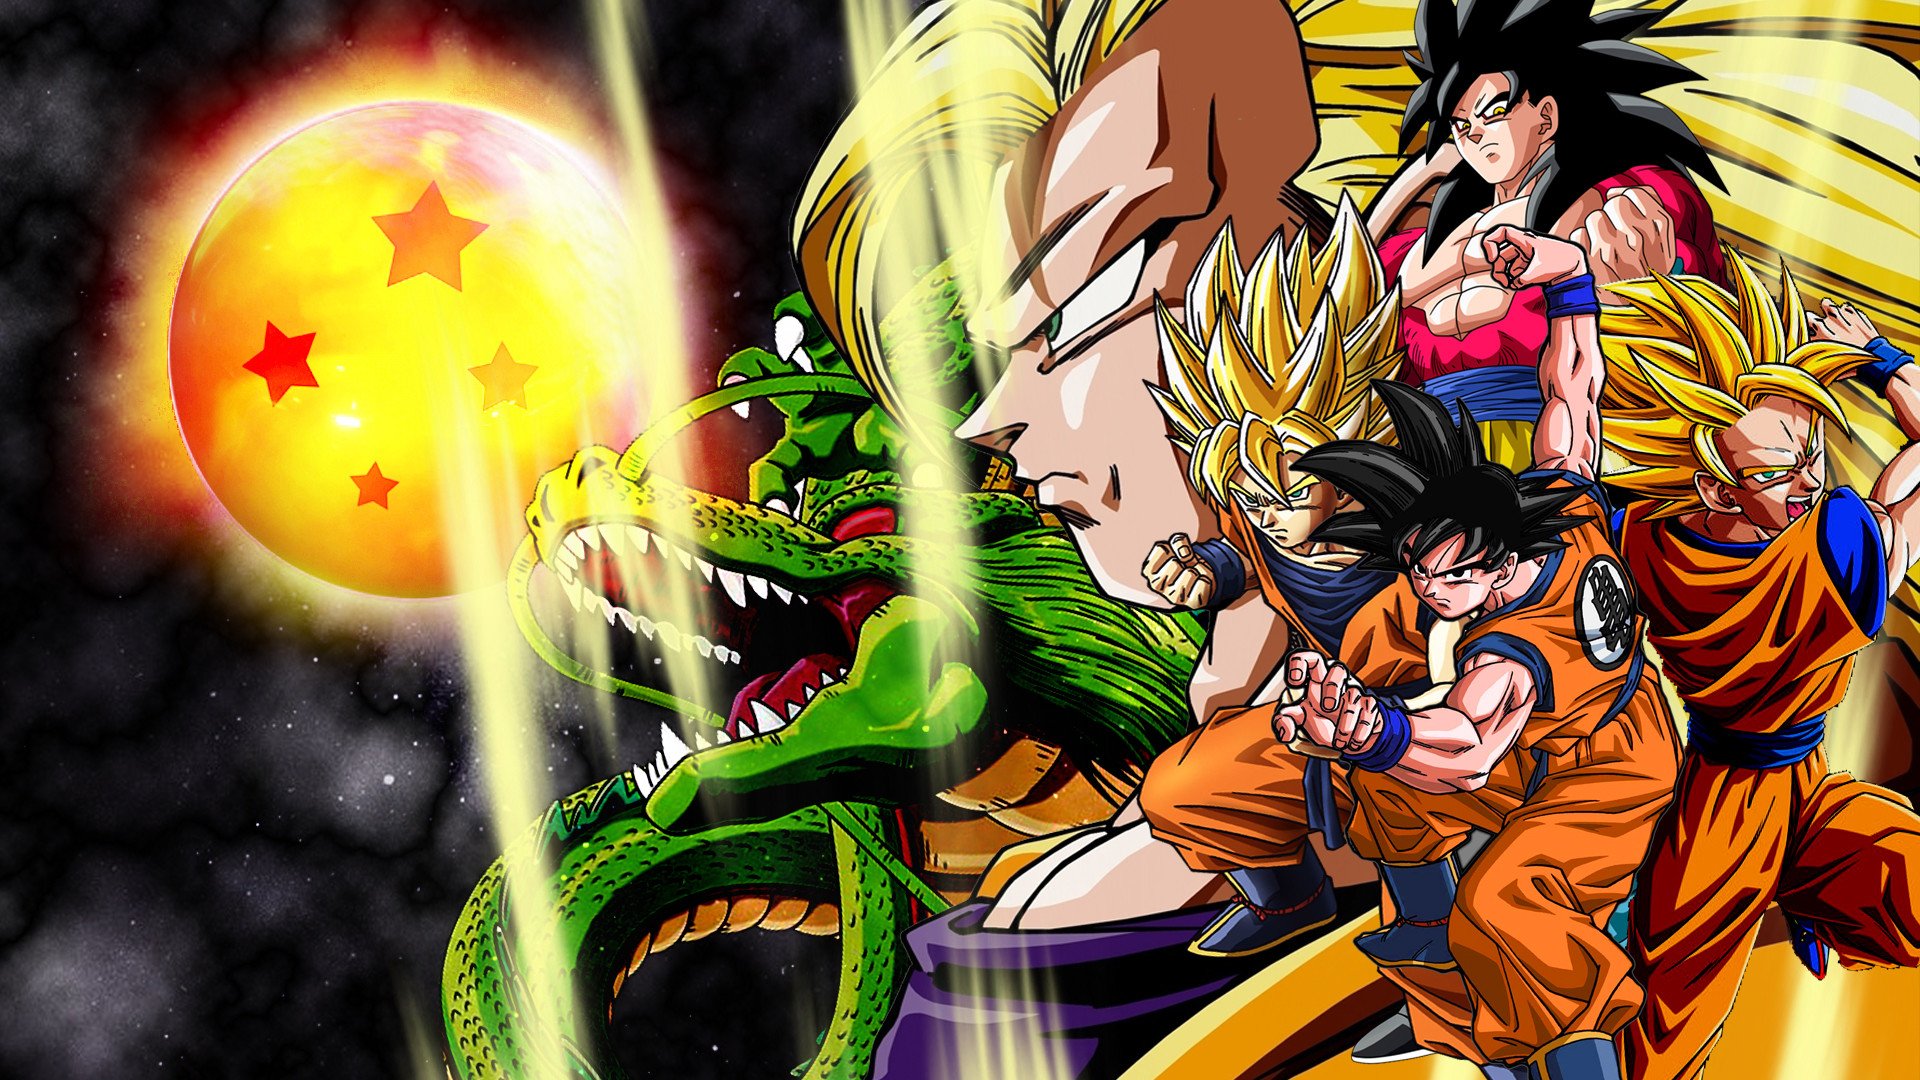 Dragon Ball Z Wallpapers - Top 35 Best Dragon Ball Z Backgrounds Download